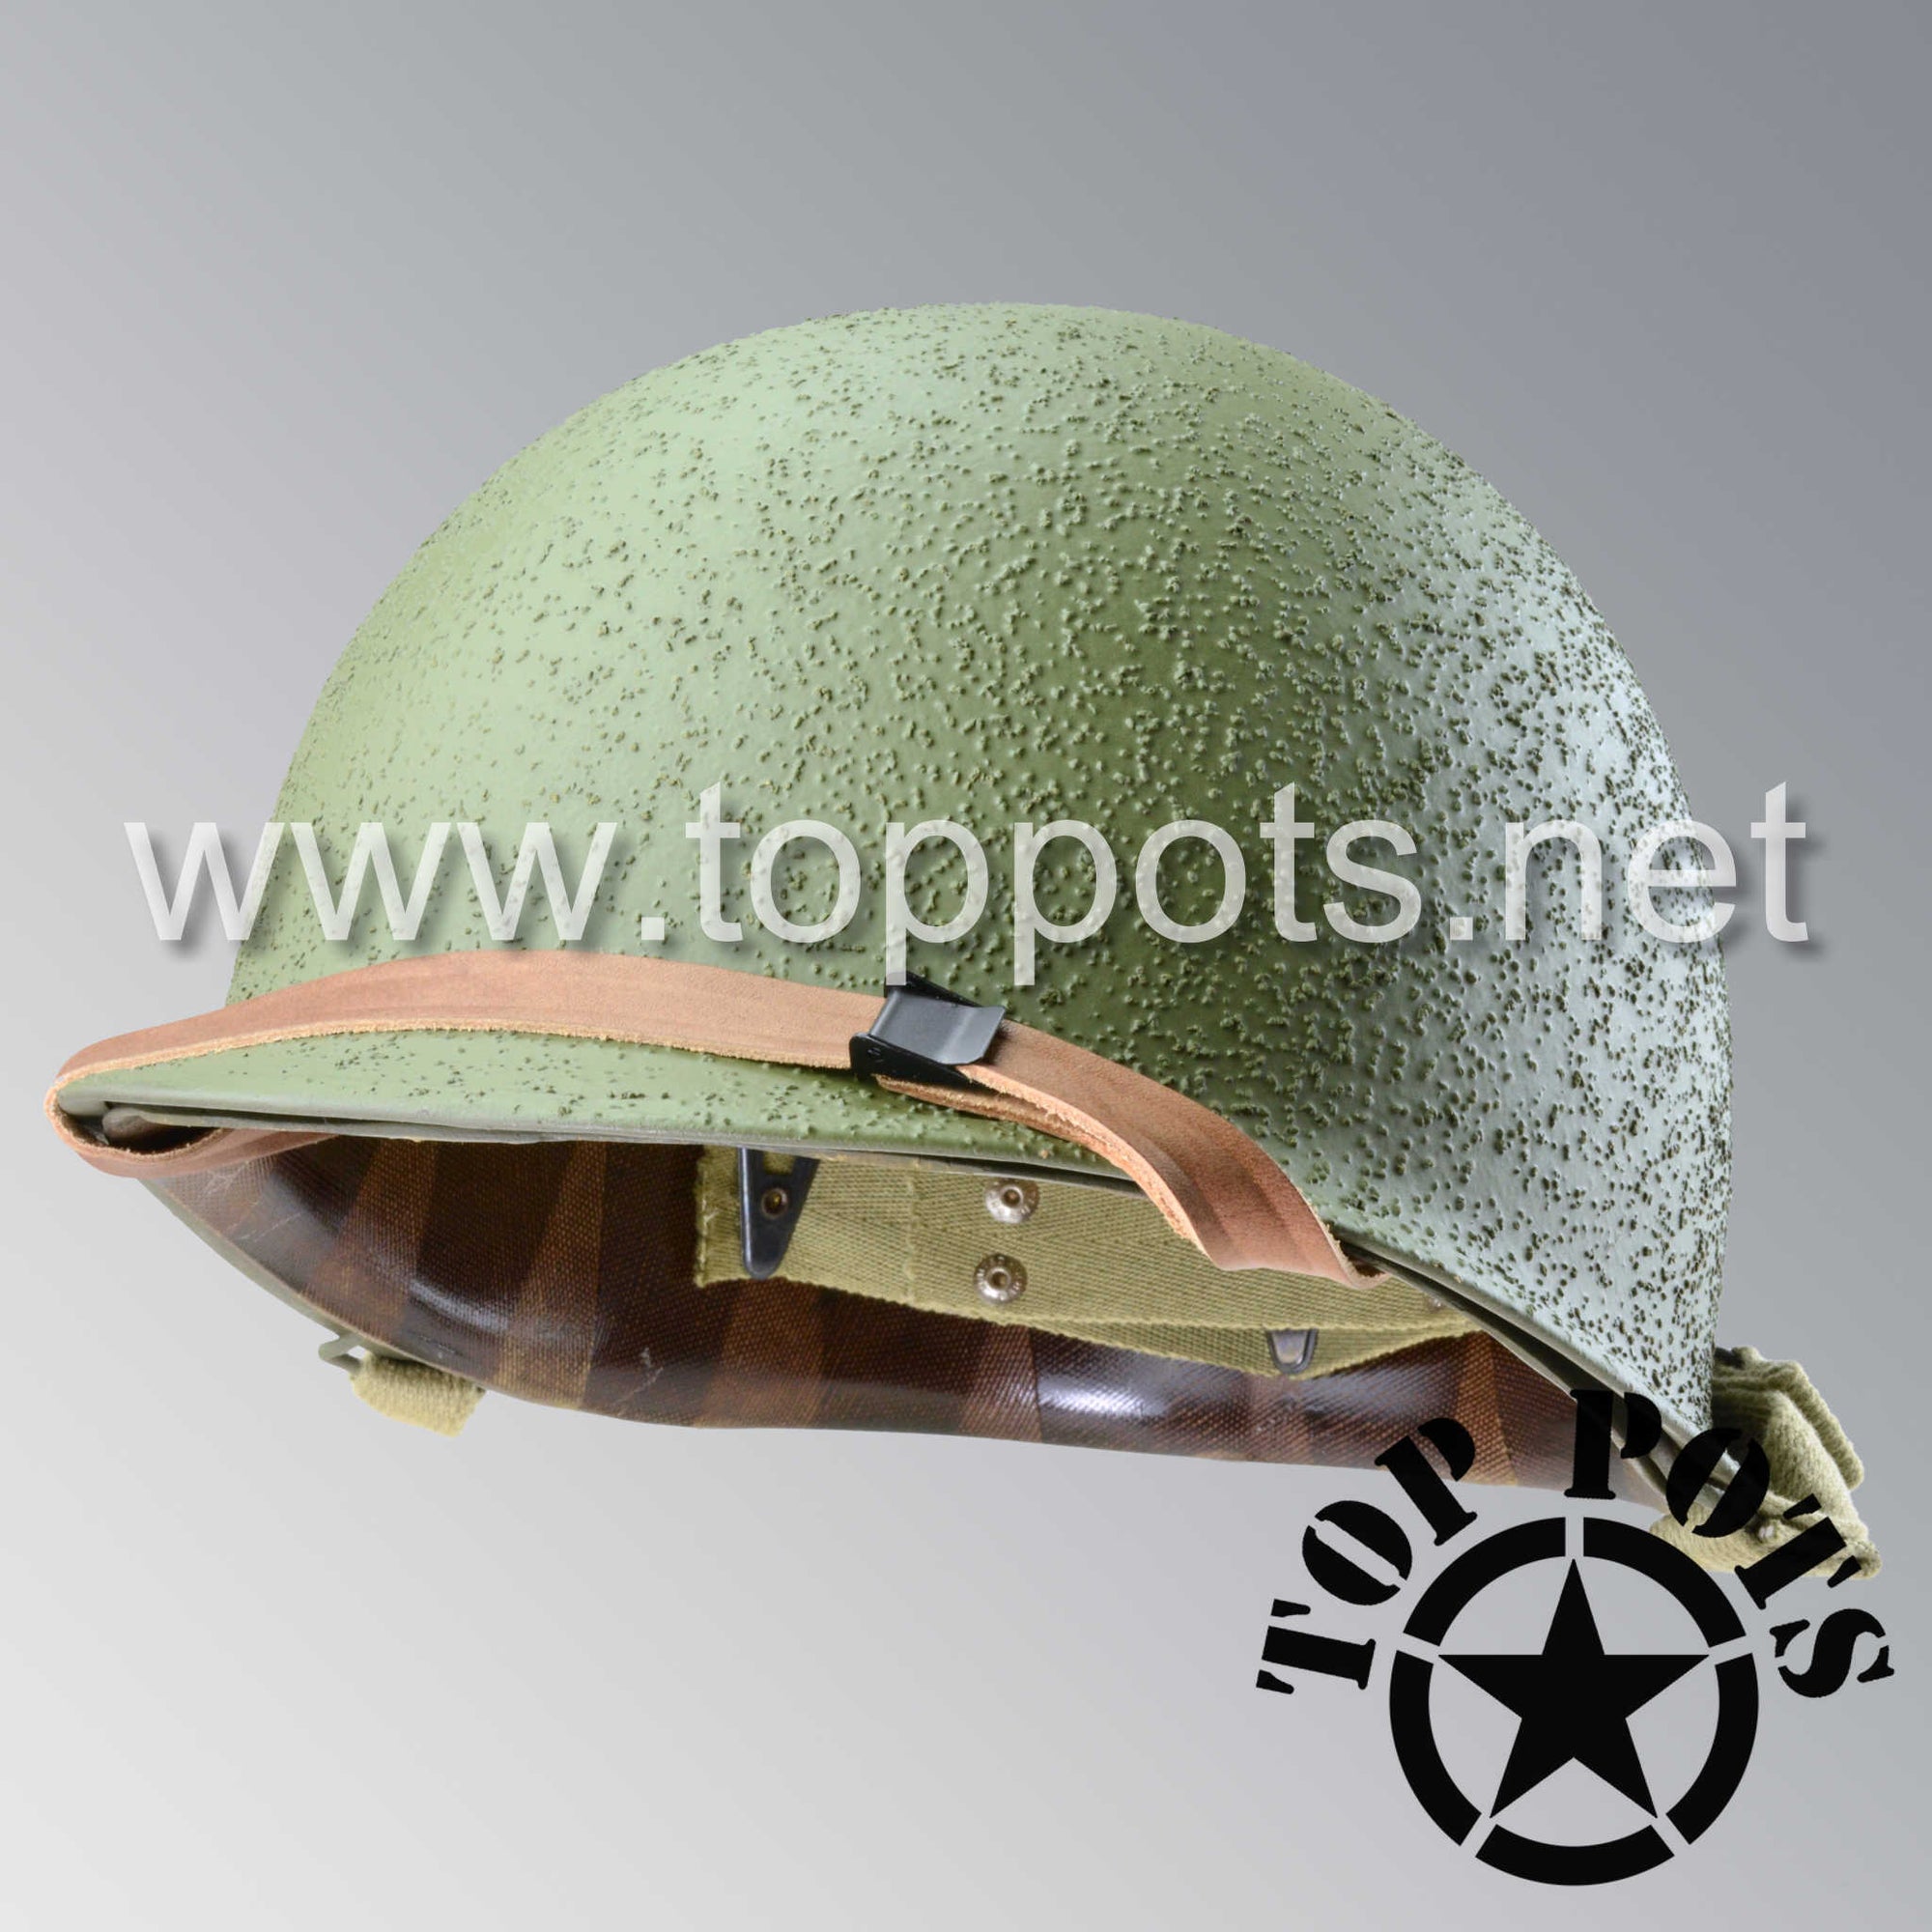 WWII US Army Restored Original M1 Infantry Helmet Swivel Bale Shell and Liner with Late War Paint Finish